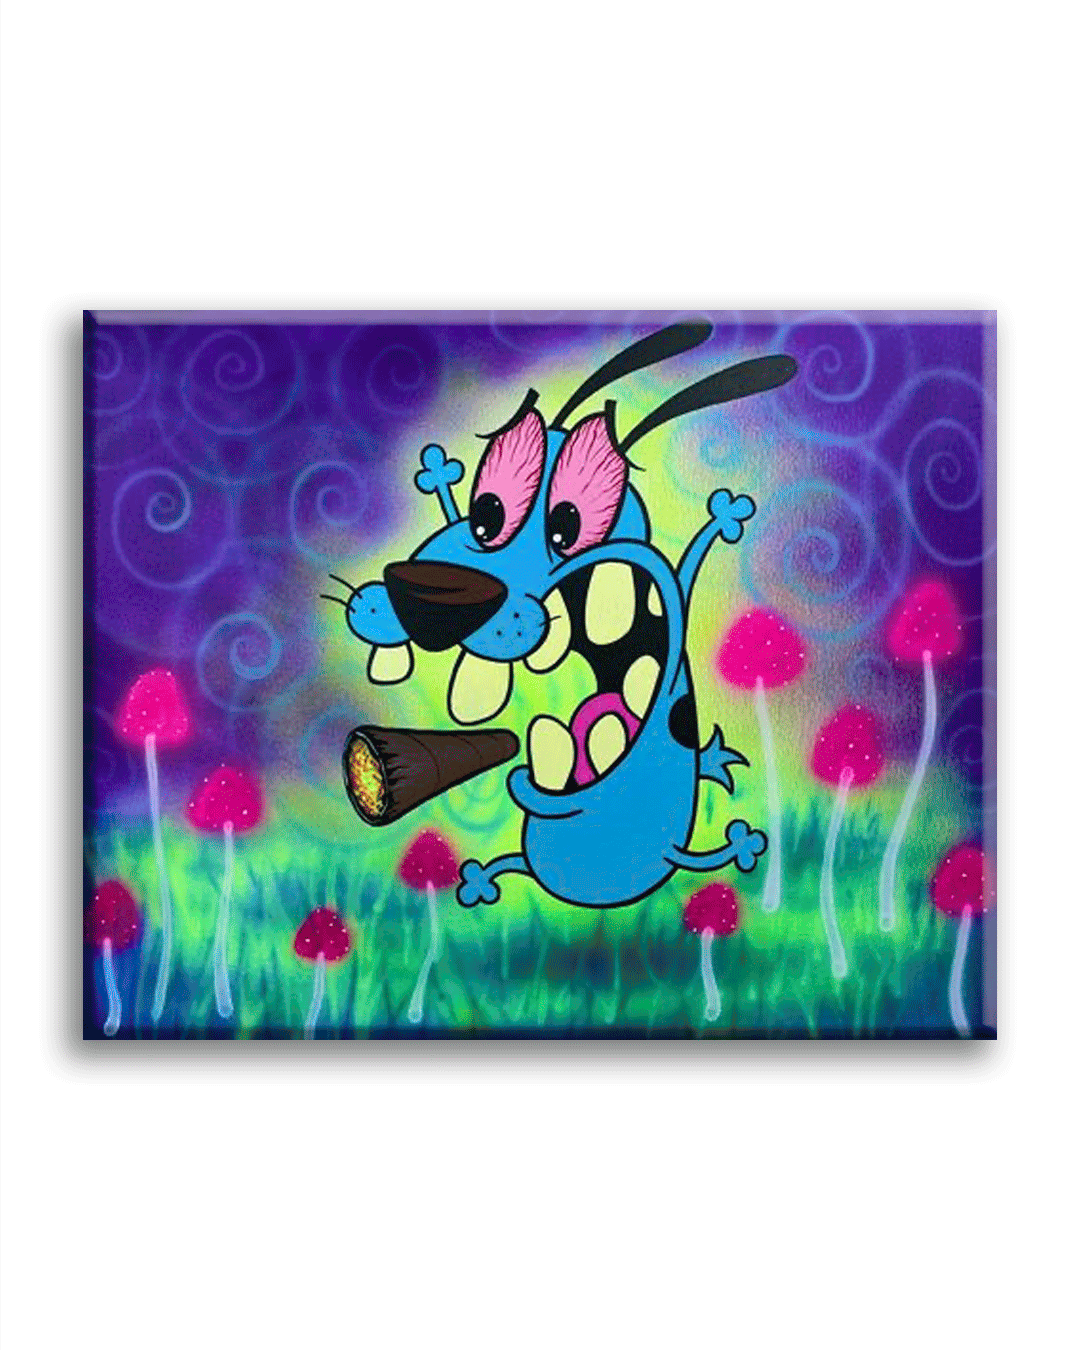 HeadyPaints - Courage the Cowardly Dog